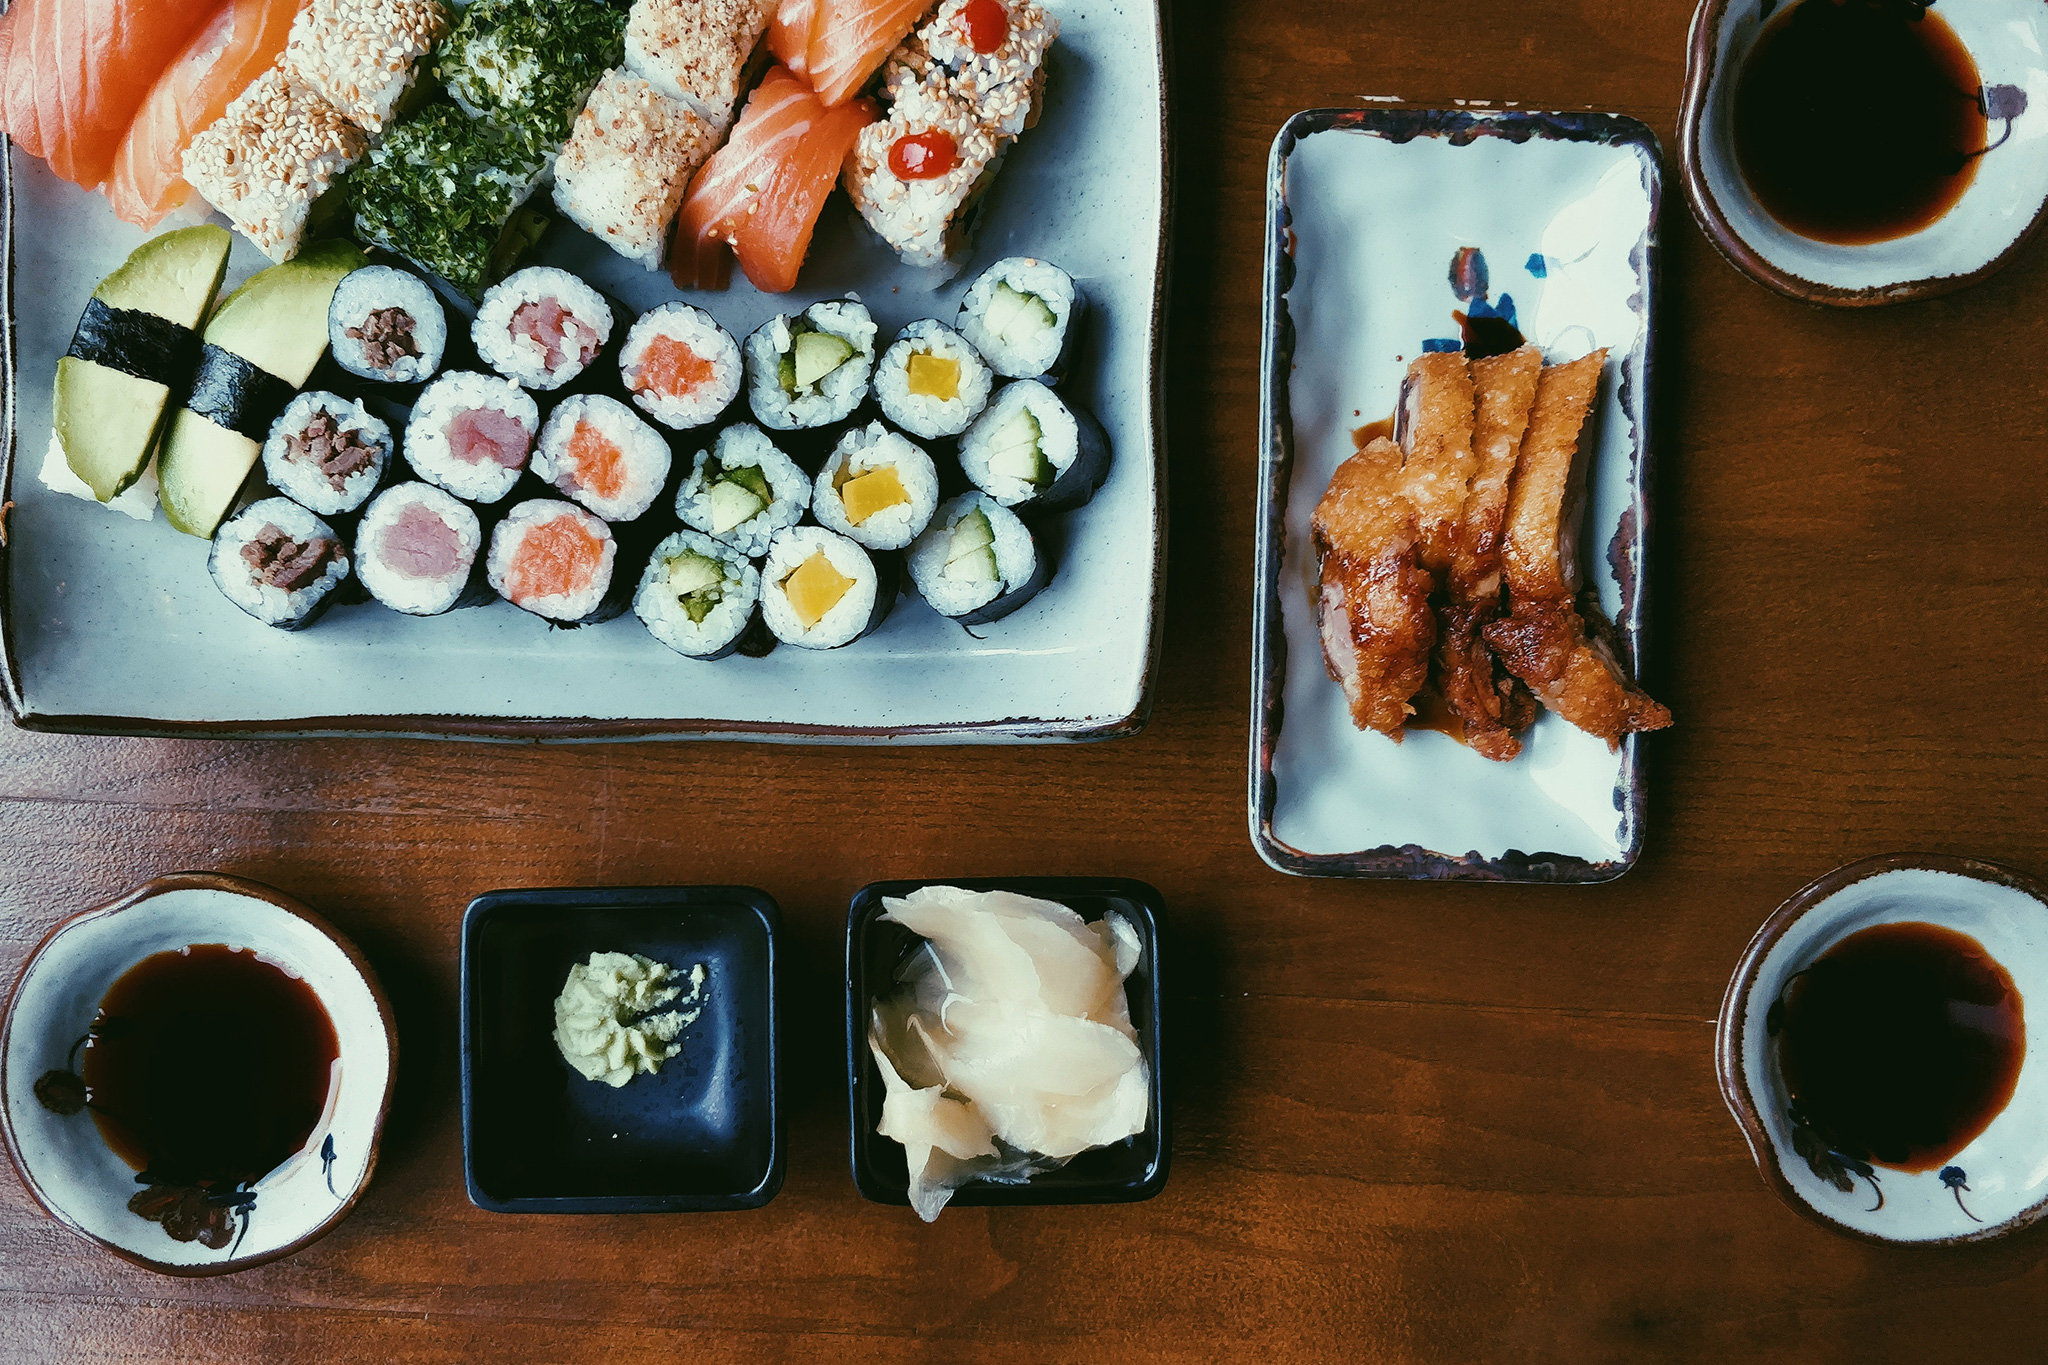 What to order from the best sushi restaurants near your office - Foodee